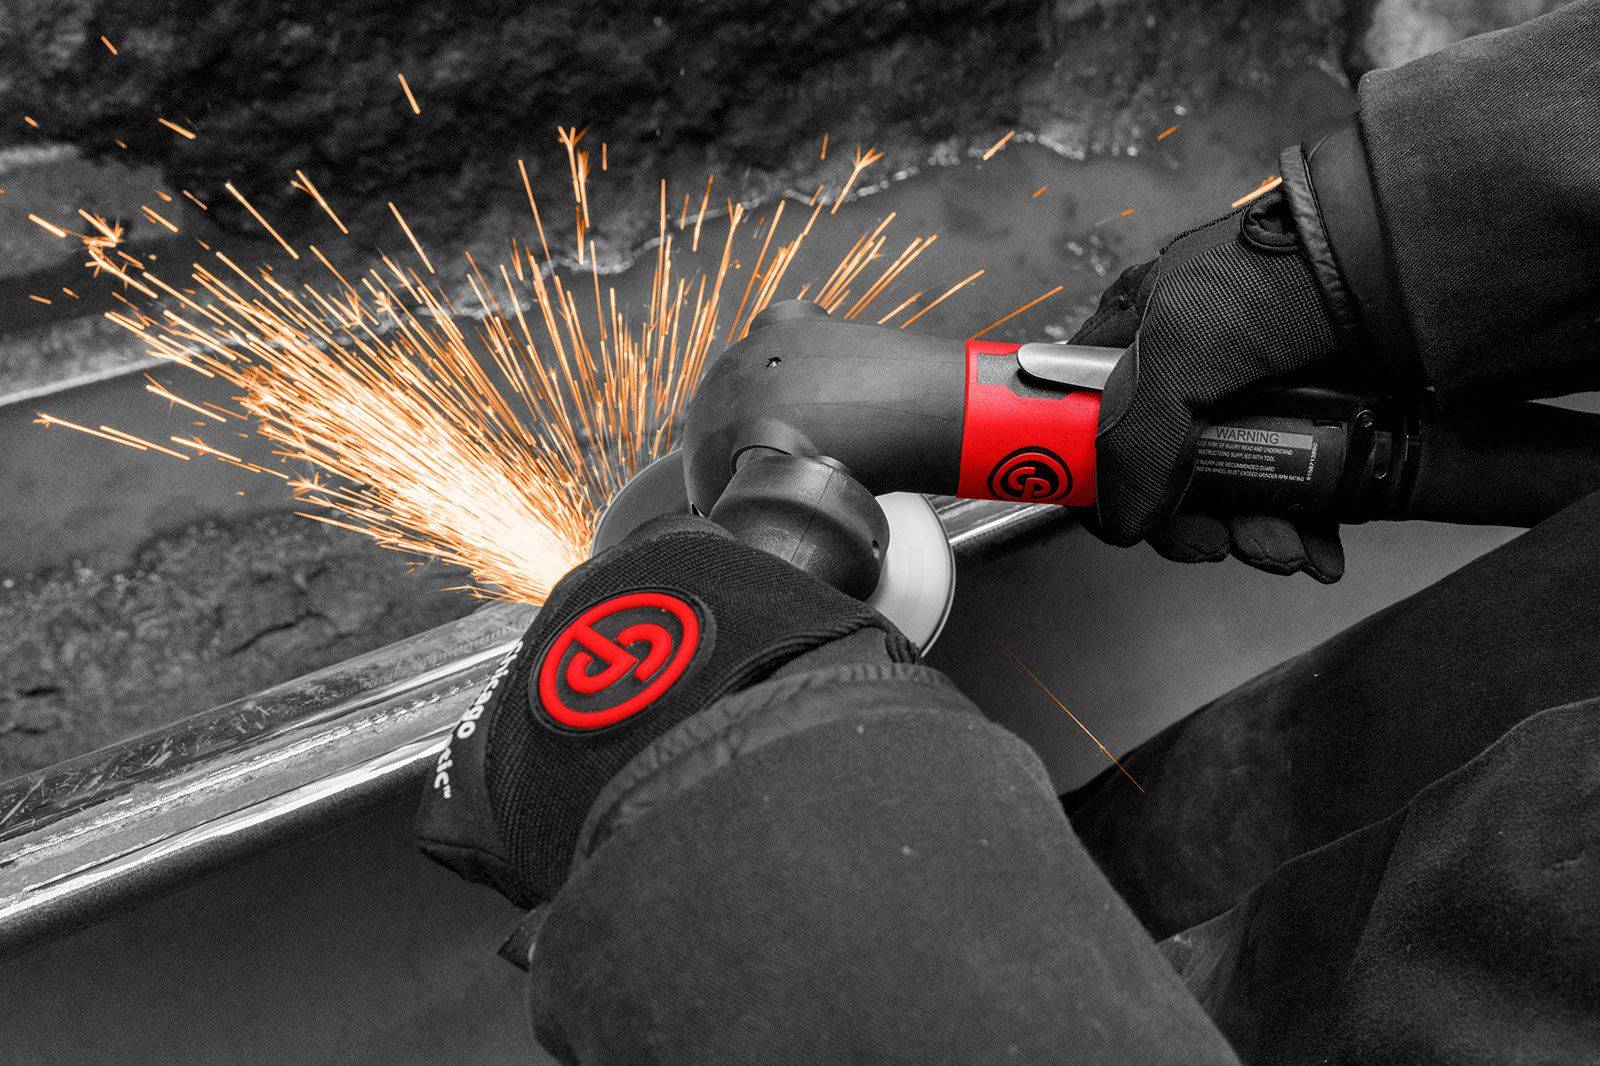 CP tools we offer at Power Tools Sales